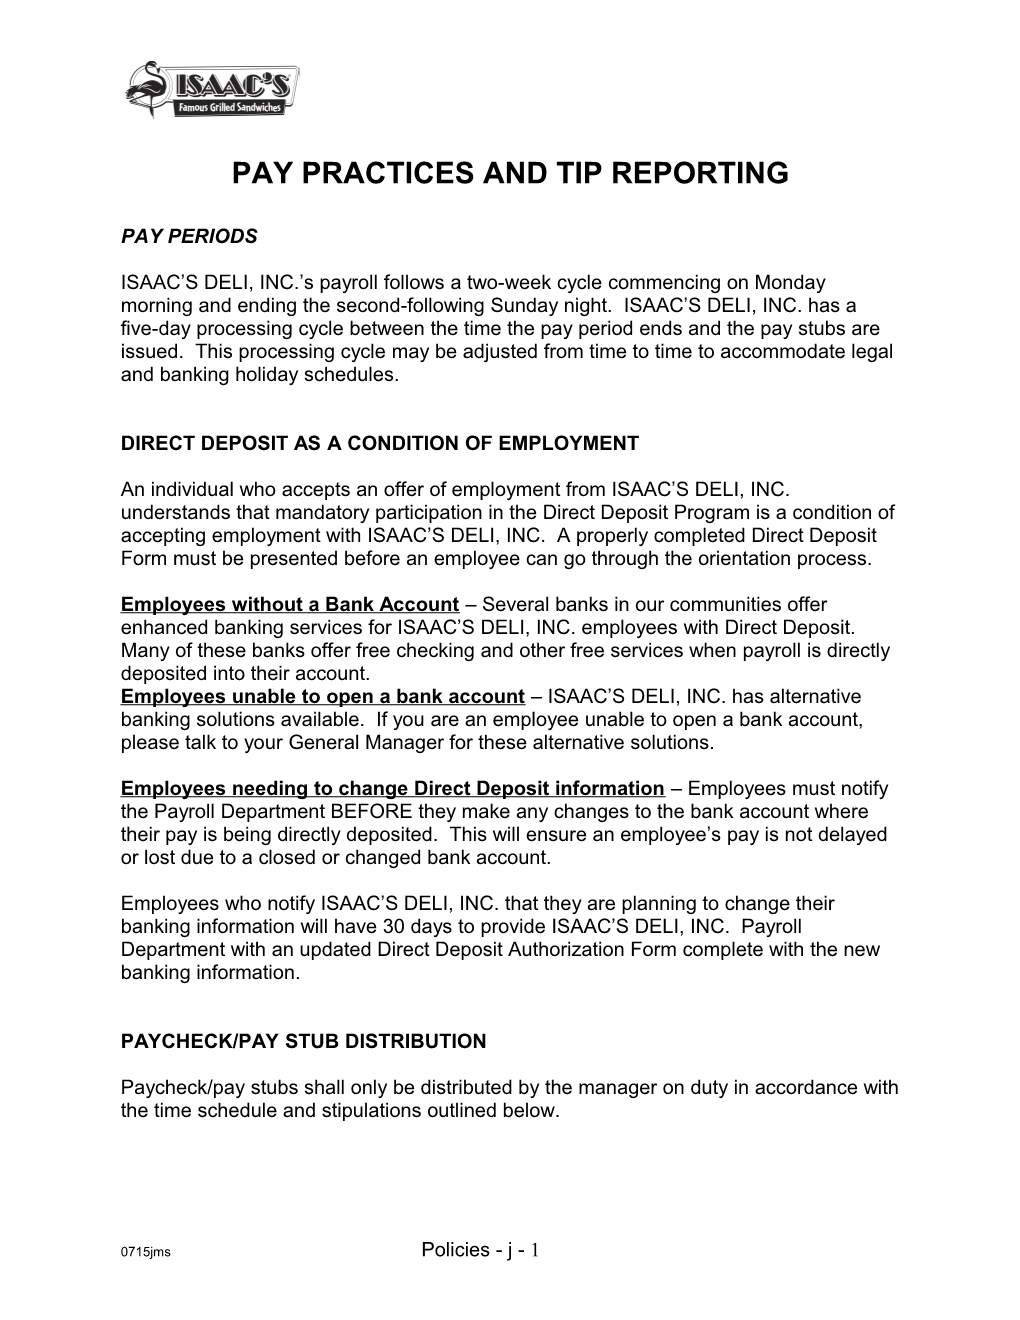 Pay Practices and Tip Reporting